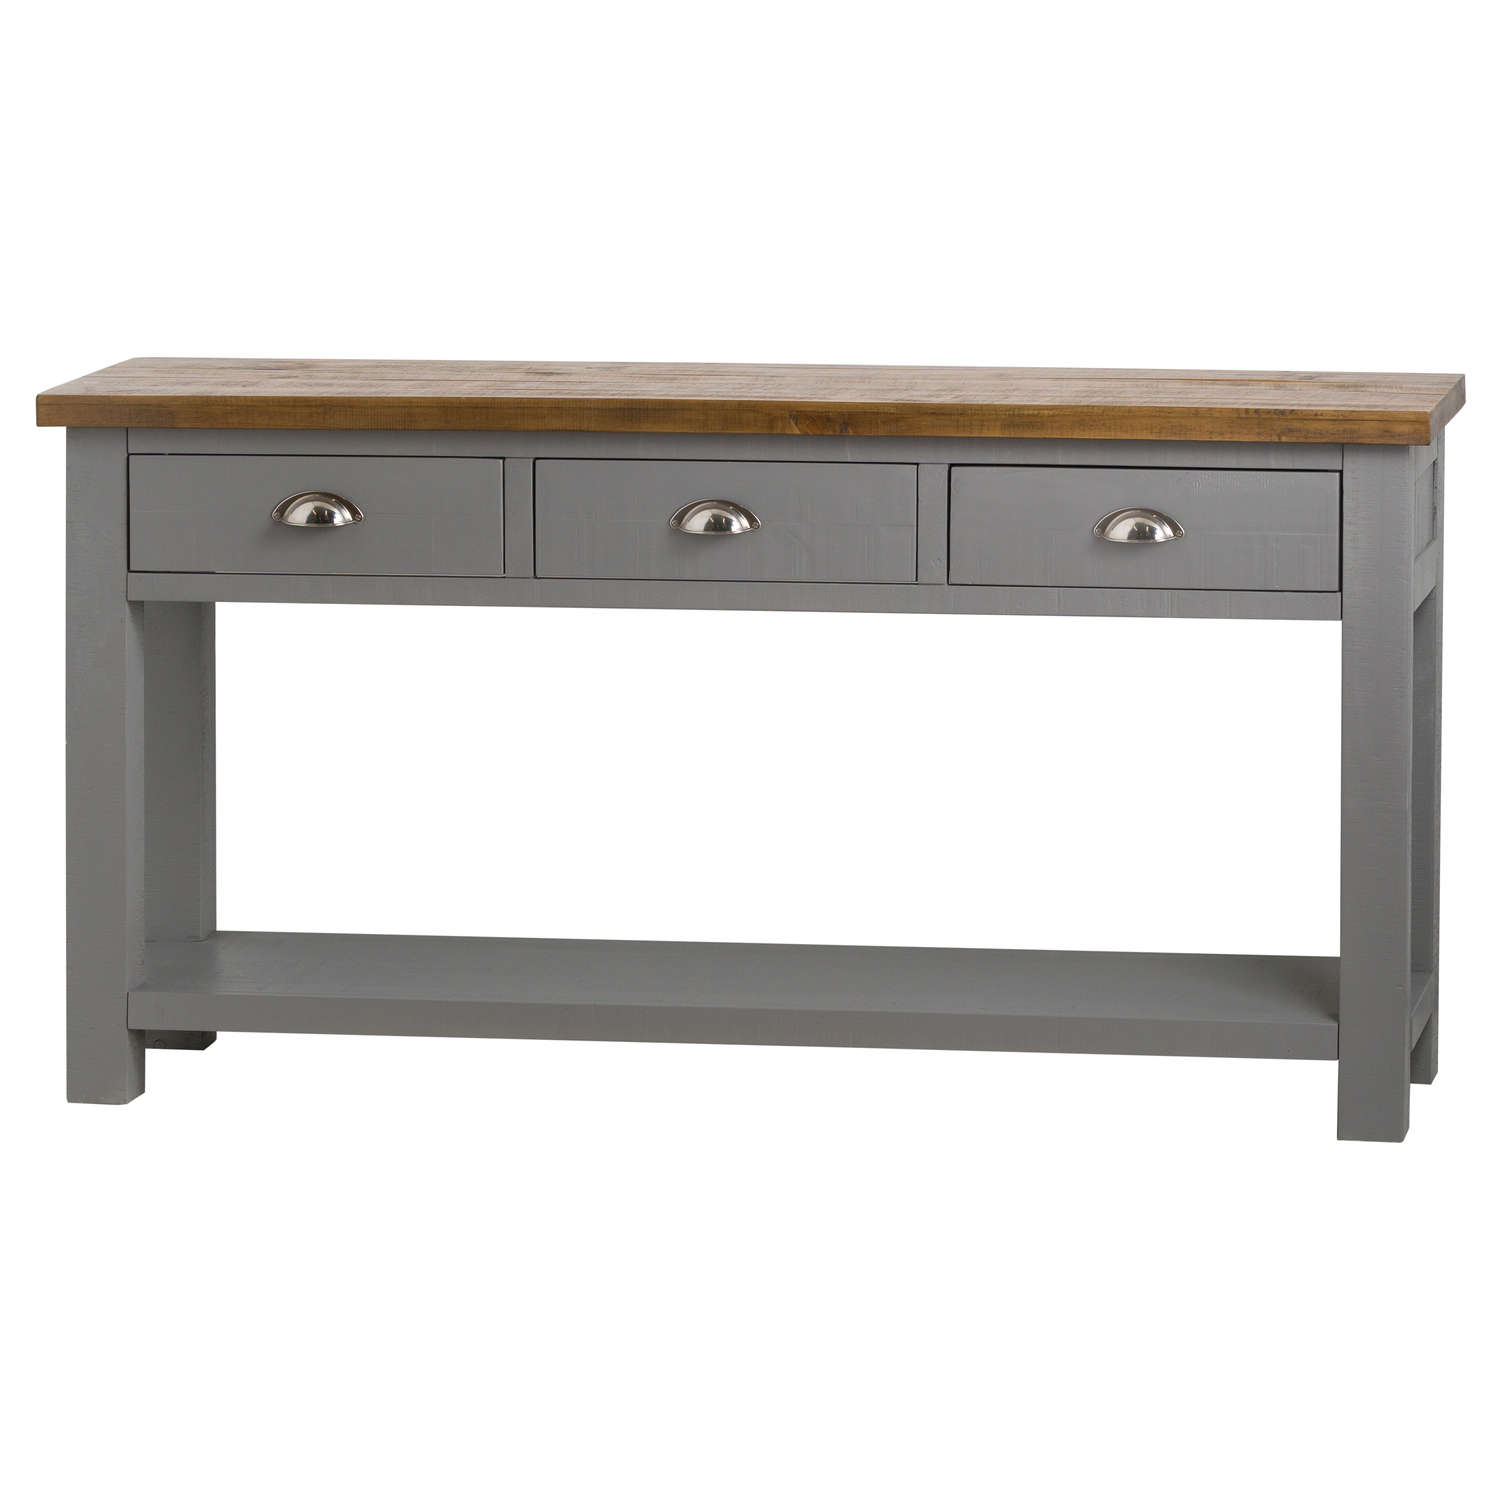 The Byland Collection Three Drawer Console